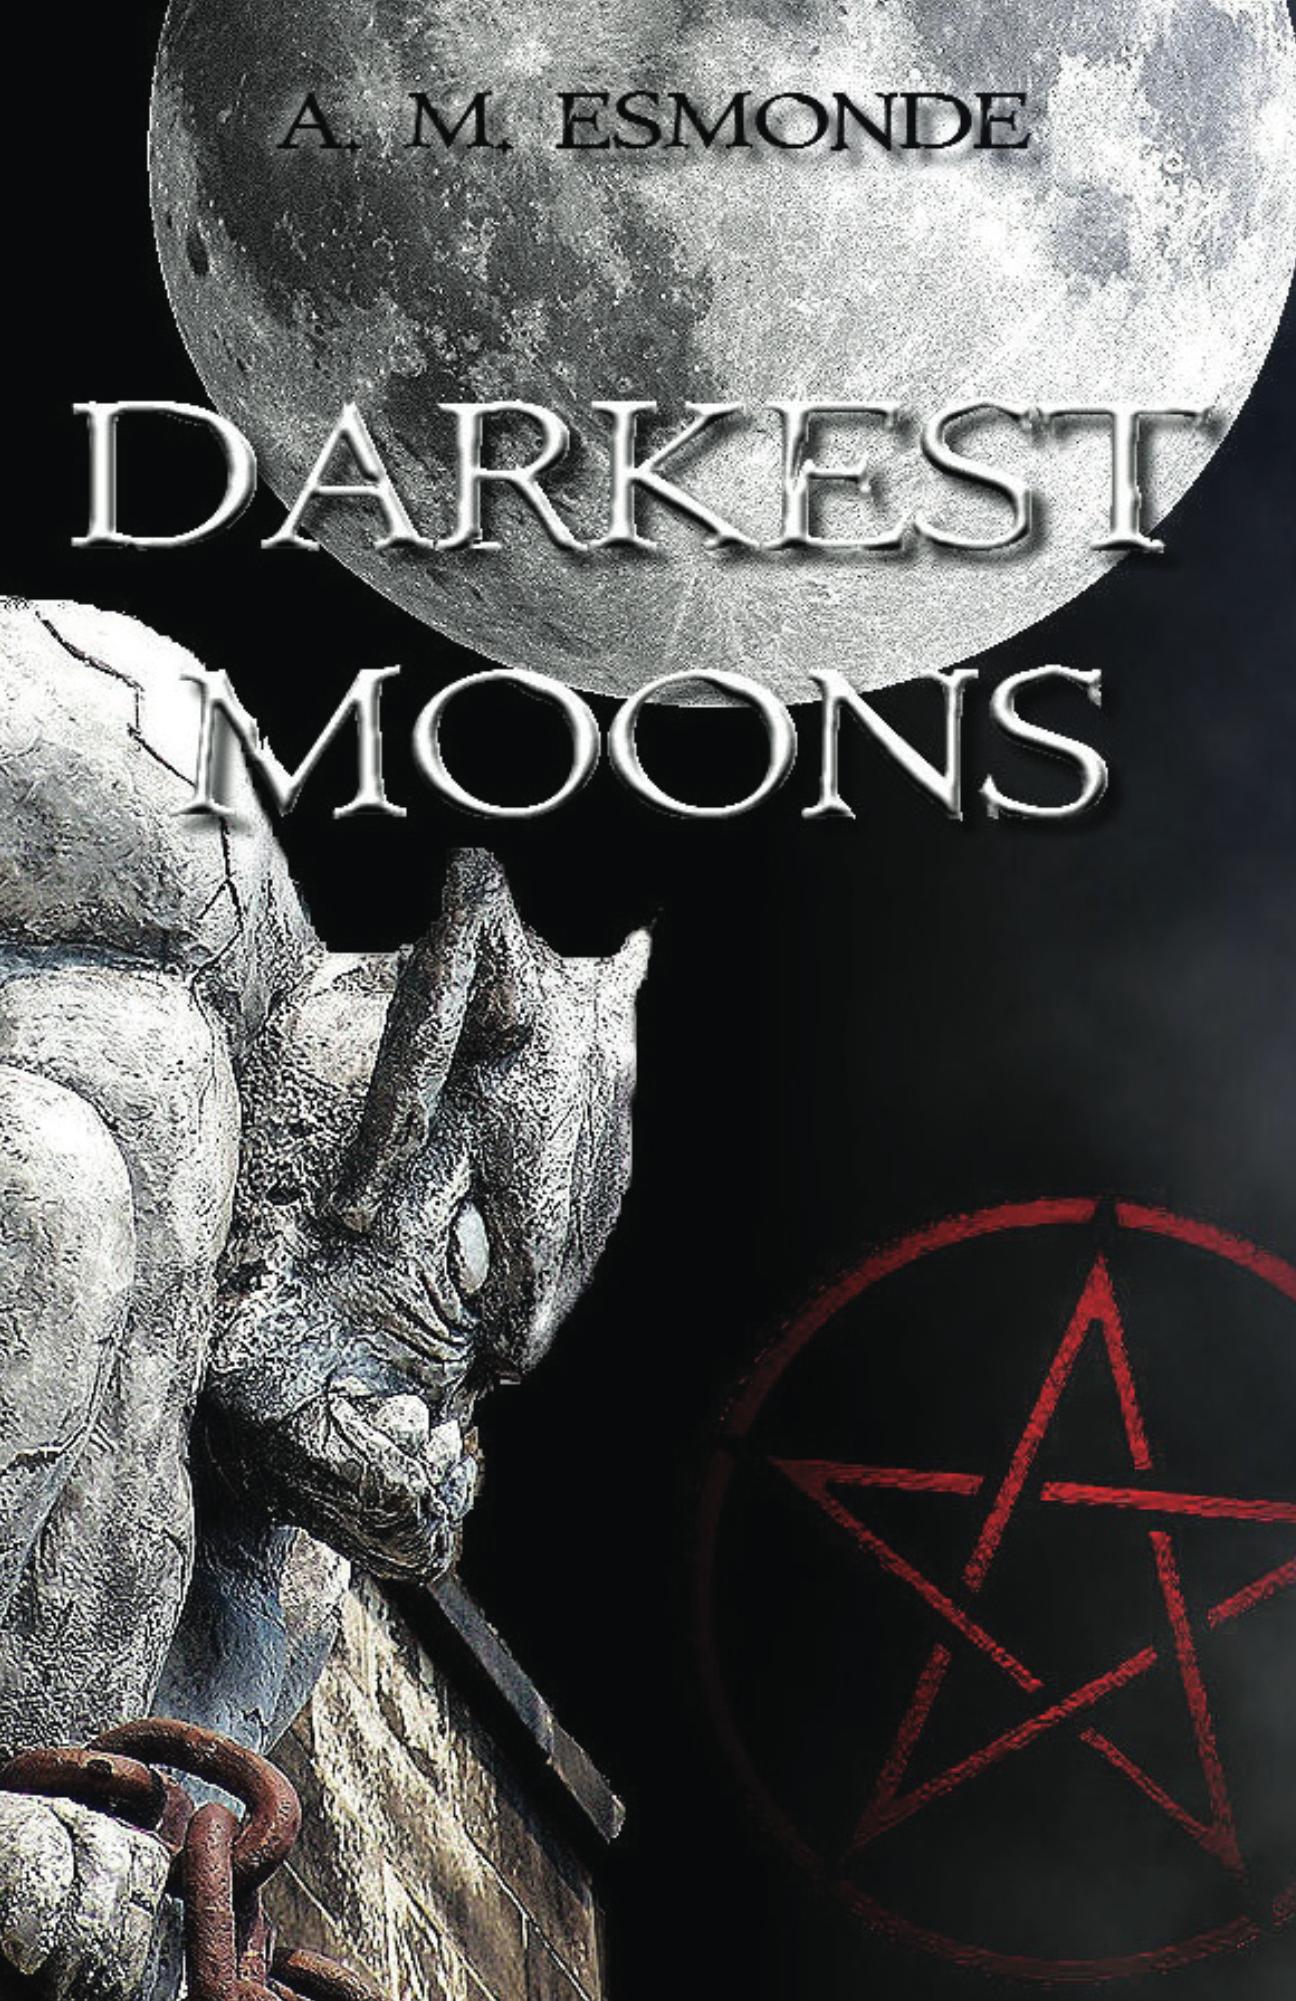 darkest_moons_cover_for_kindle